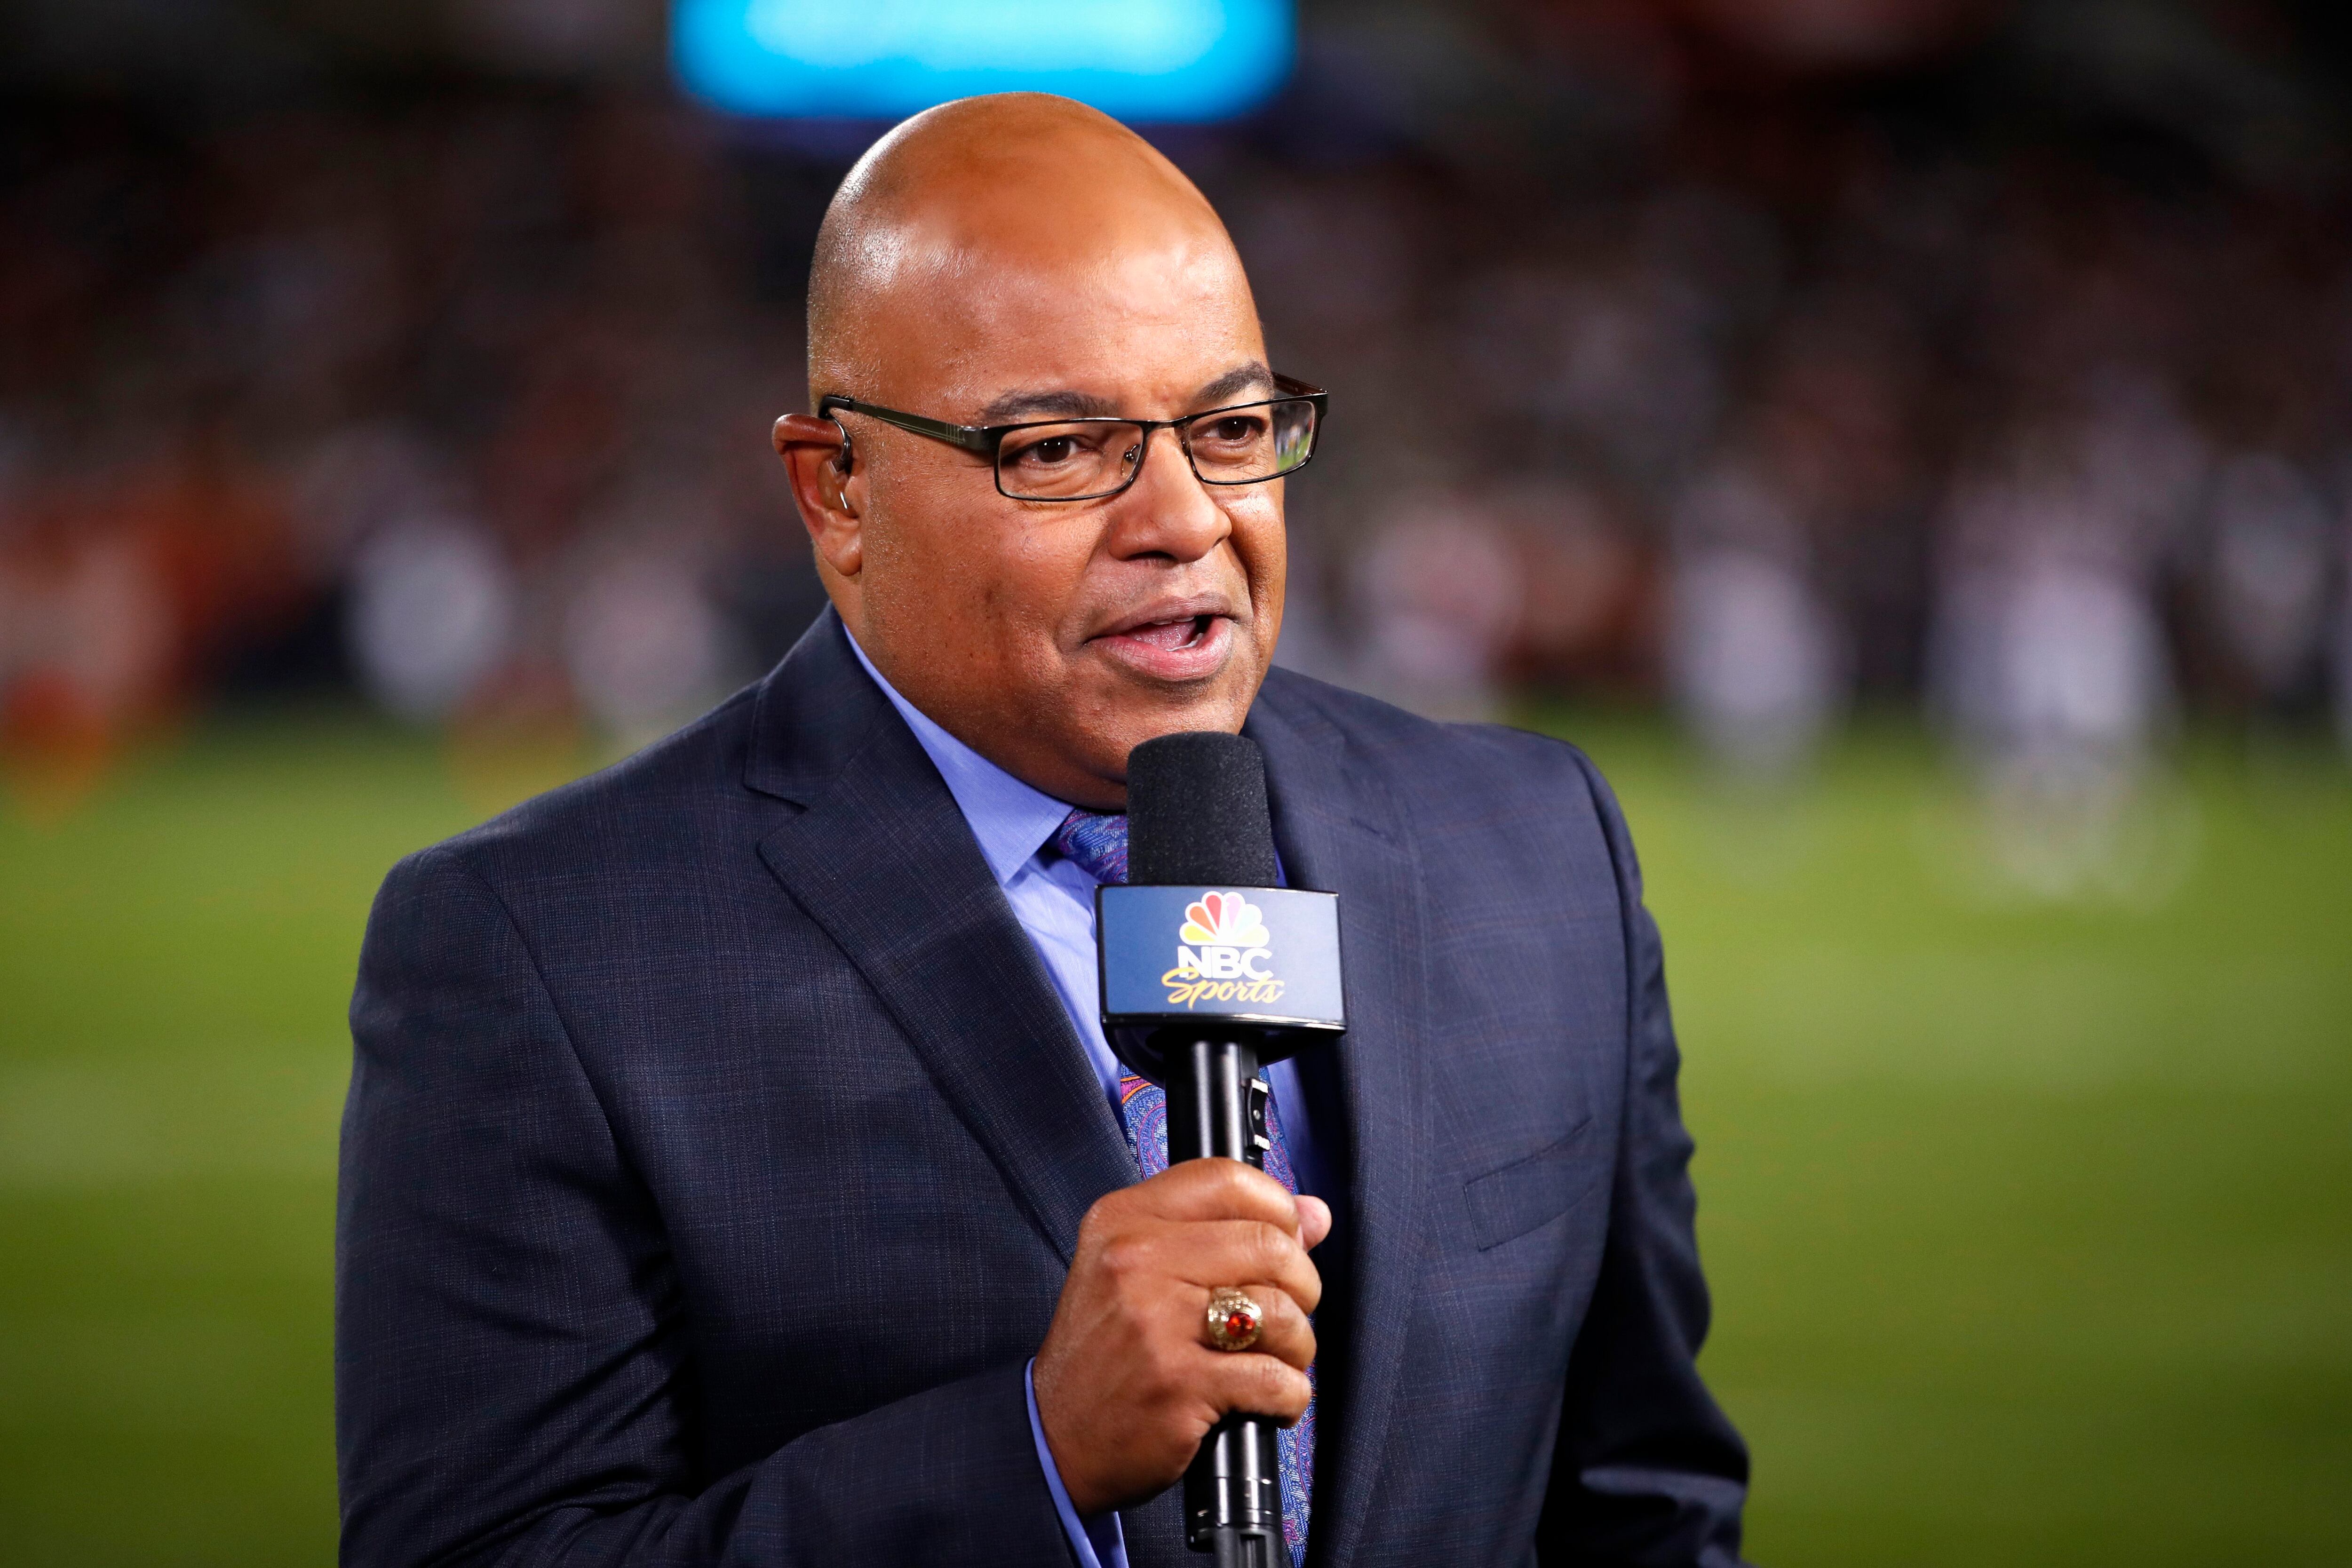 NBC’s Tirico coming back from Beijing earlier than planned